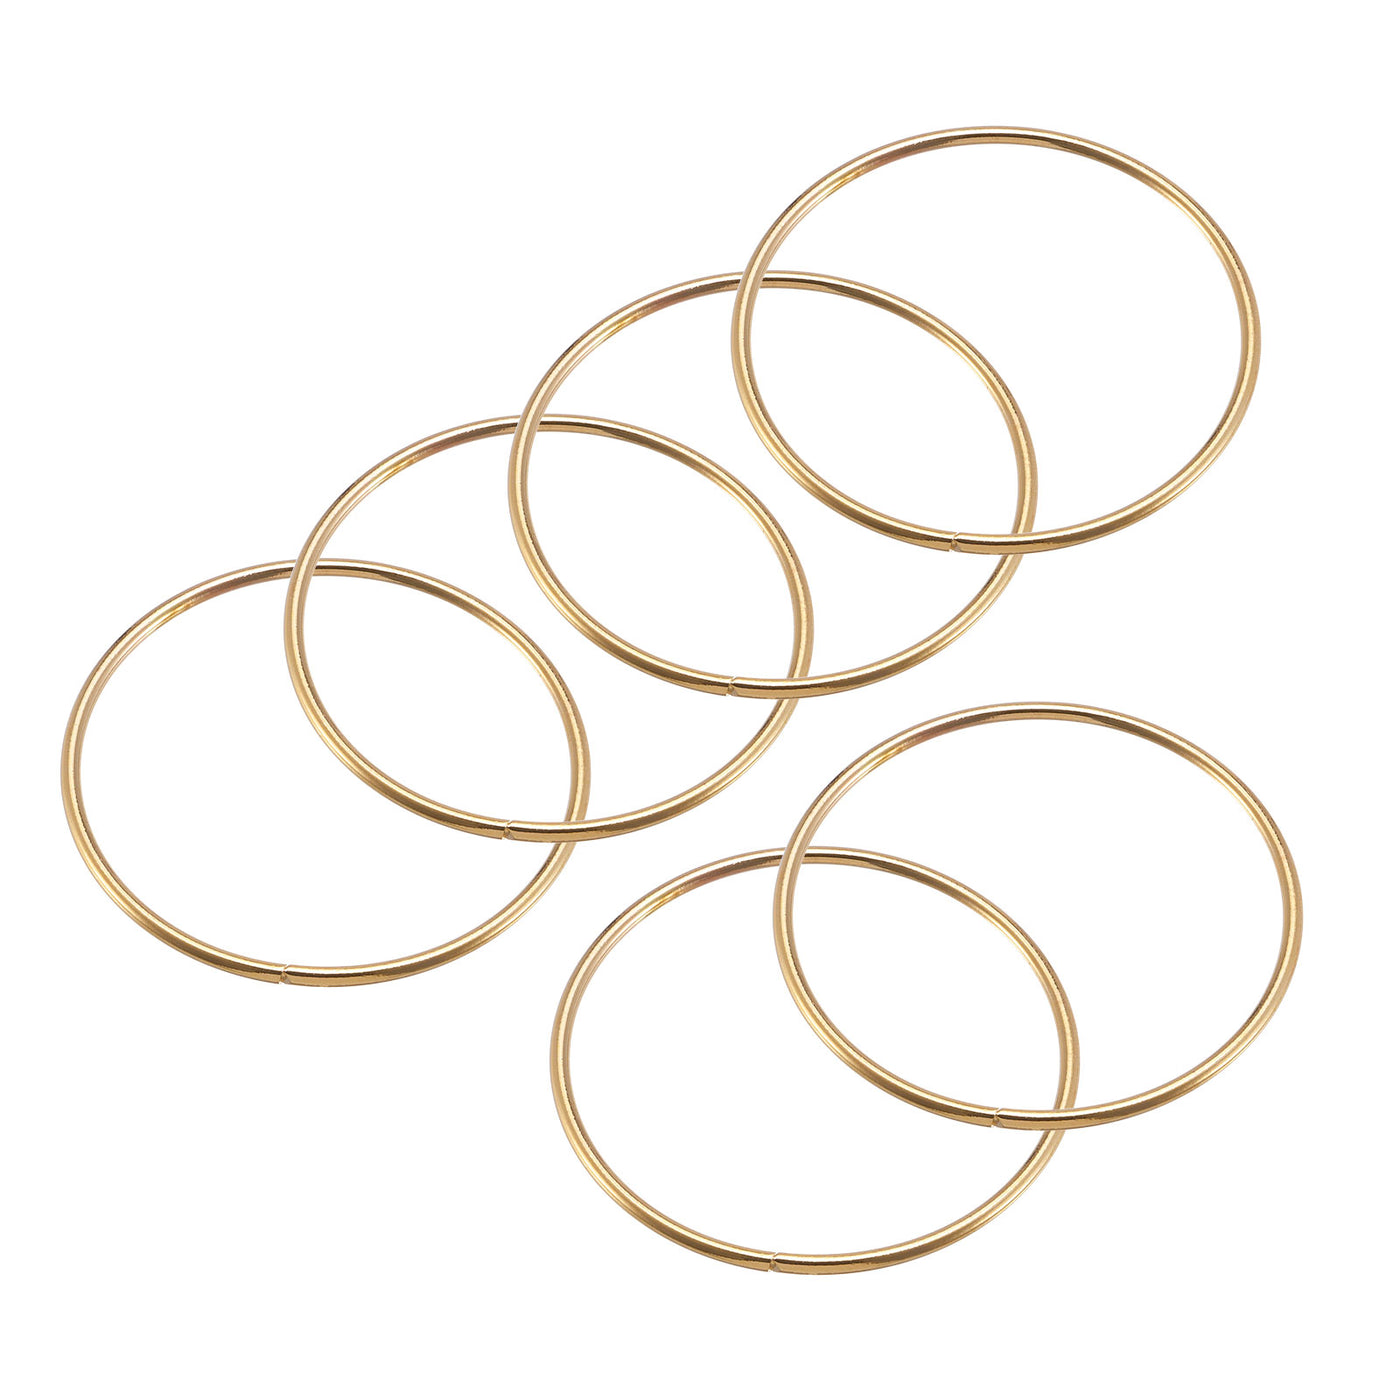 uxcell Uxcell 70mm(2.76") OD Metal O Ring Non-Welded Craft Hoops for DIY Gold Tone 10pcs